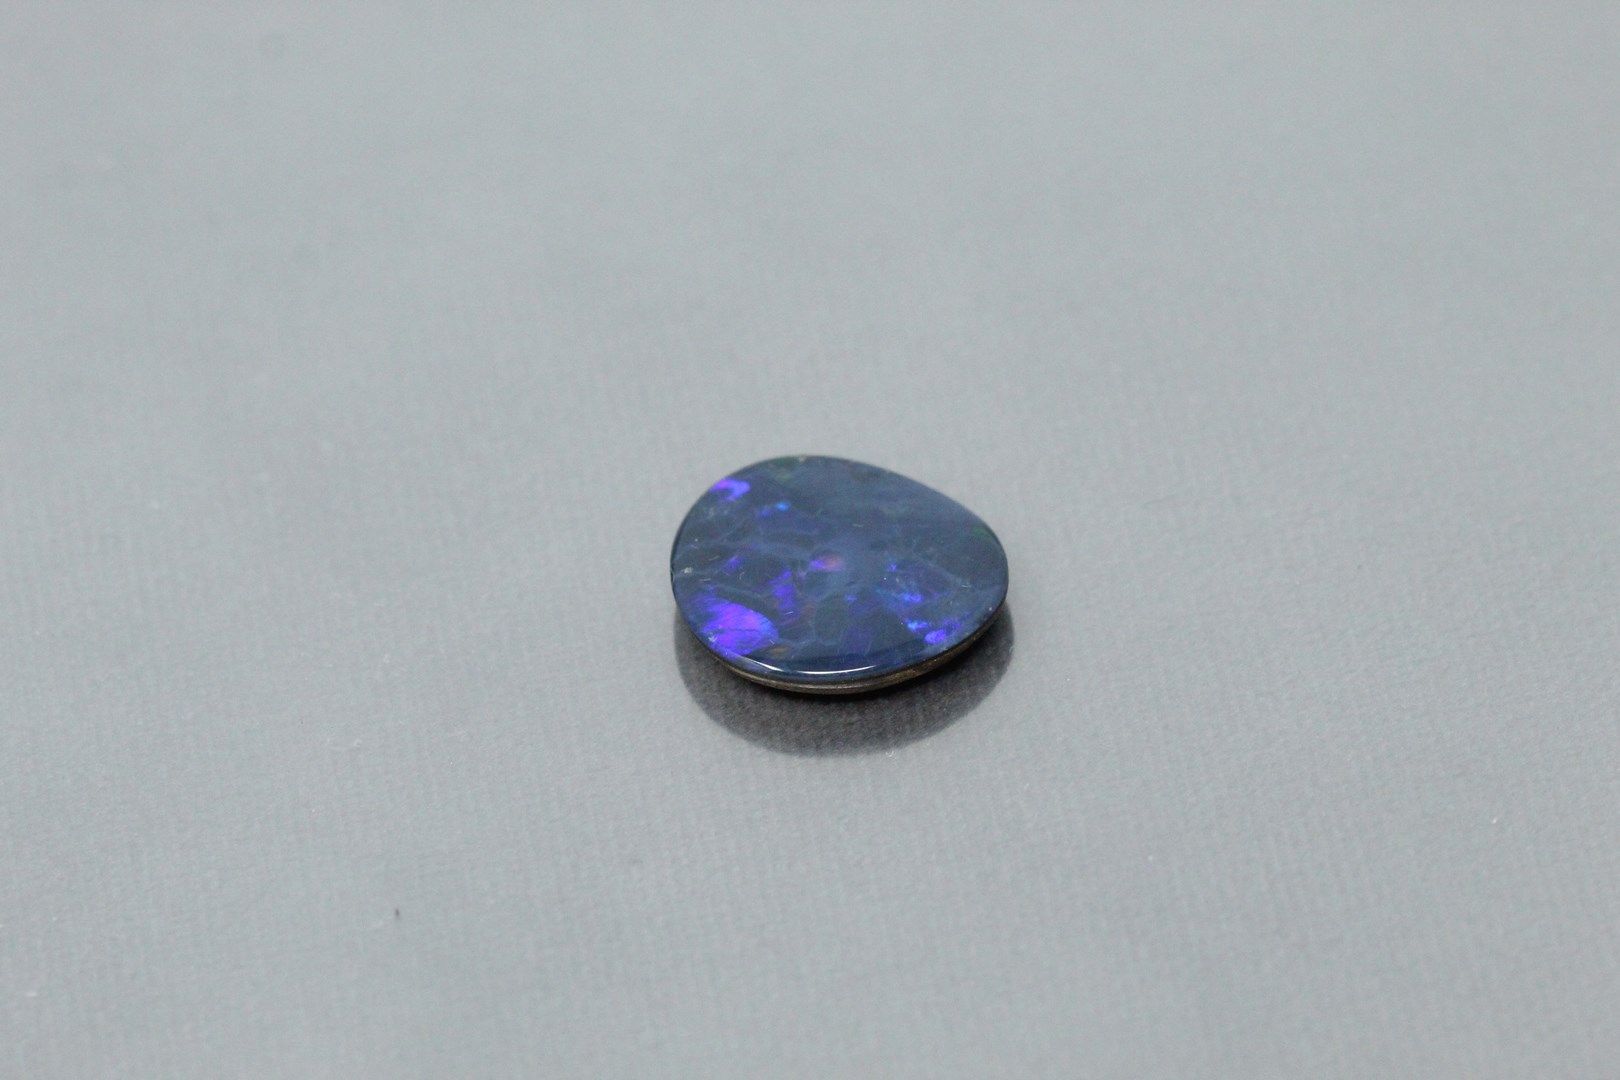 Null Blue opal on paper

Size 2cm x 1,8 cm